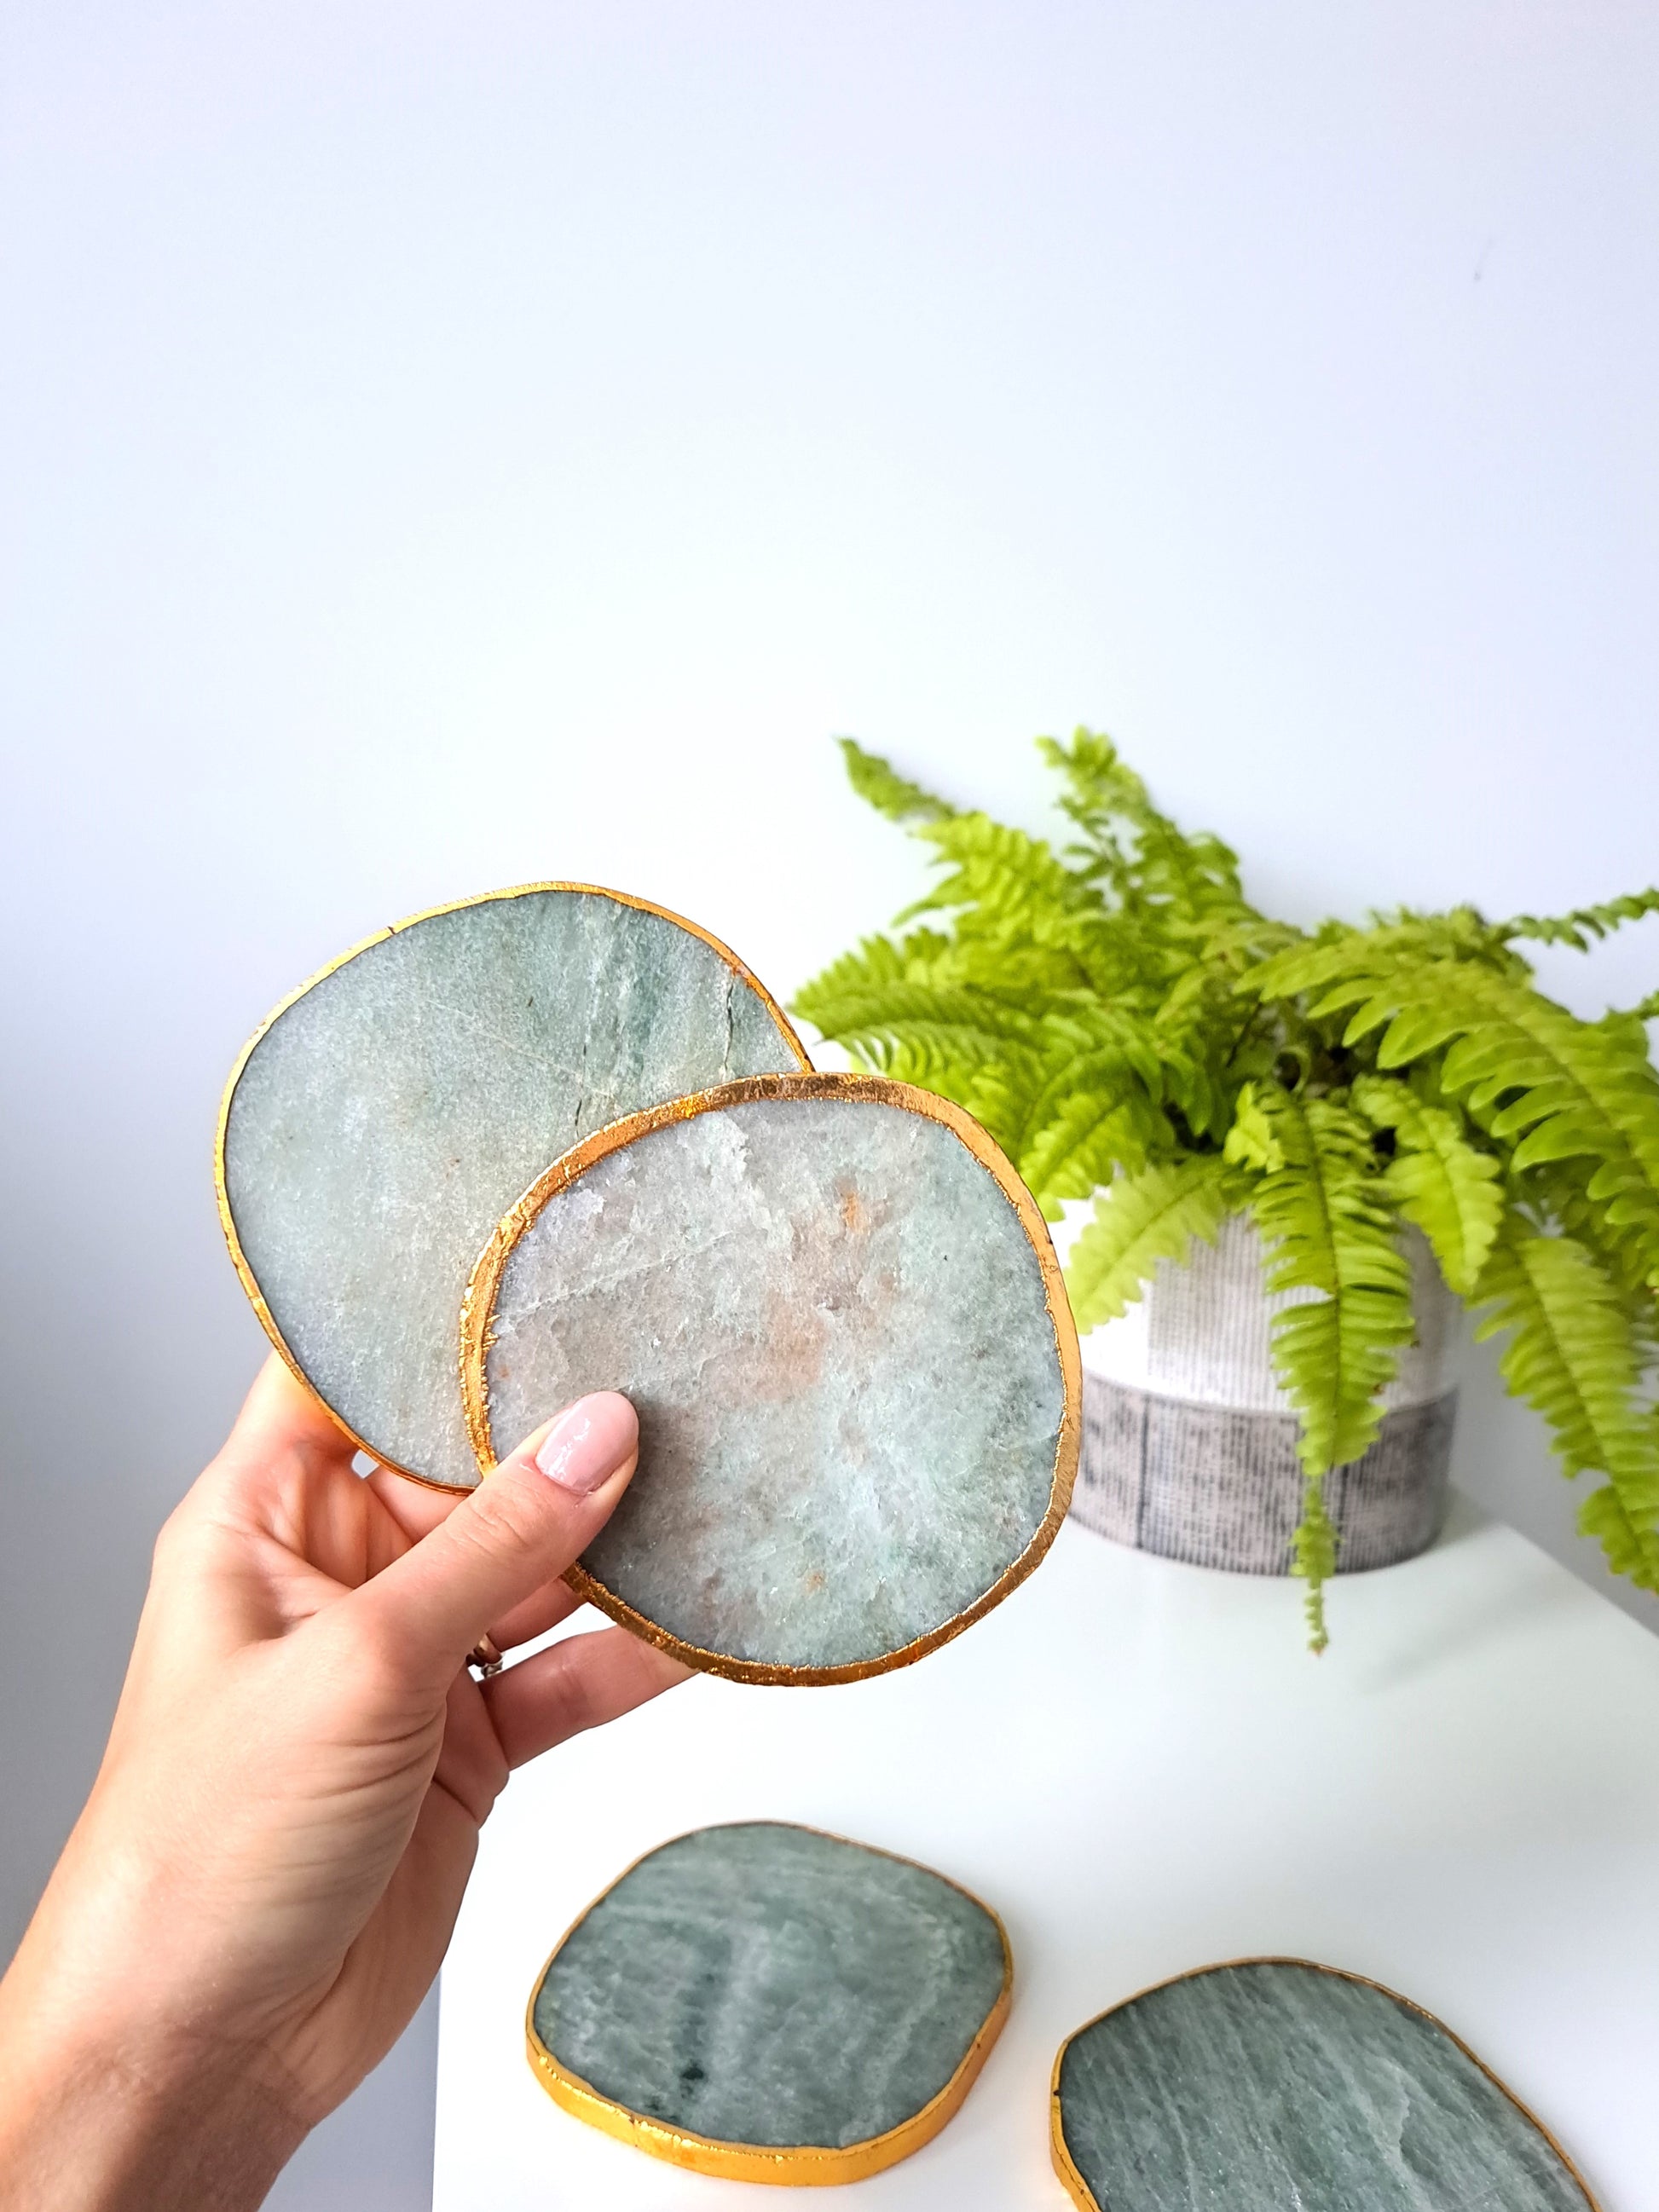 Artisanal, handmade agate coaster. Made with agate stone, this coaster has a beautiful shine to it. Formed within volcanic and metamorphic rocks, the use of agate in crafting decorative items dates back to ancient Greek civilizations. Agate is also known for it's strength and ability to retain a smooth polish, making it a very functional material.